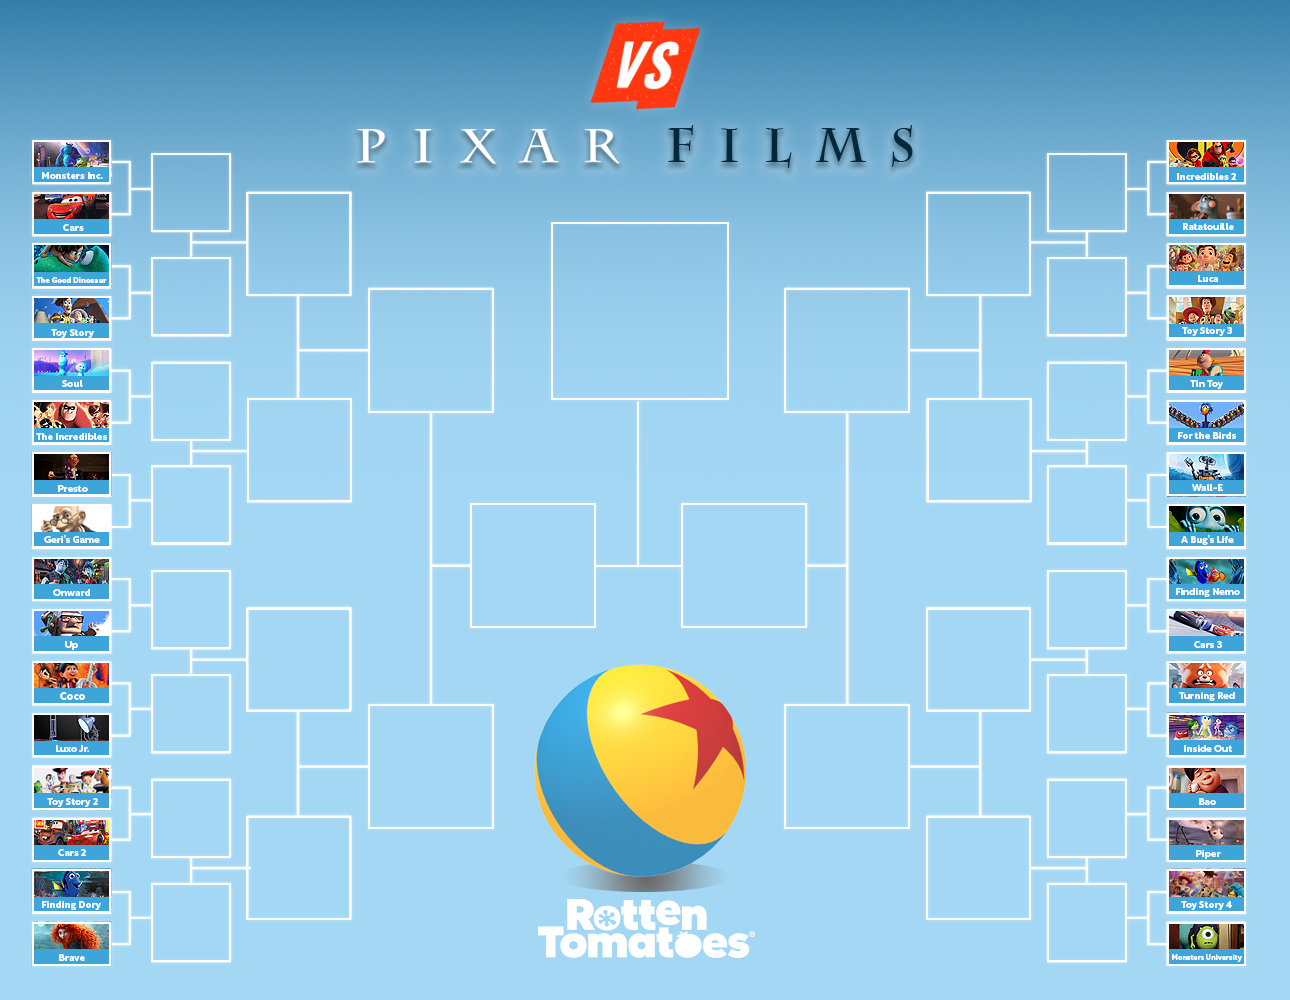 Rotten Tomatoes on X: Vote for your favorite movie of 2022 to win